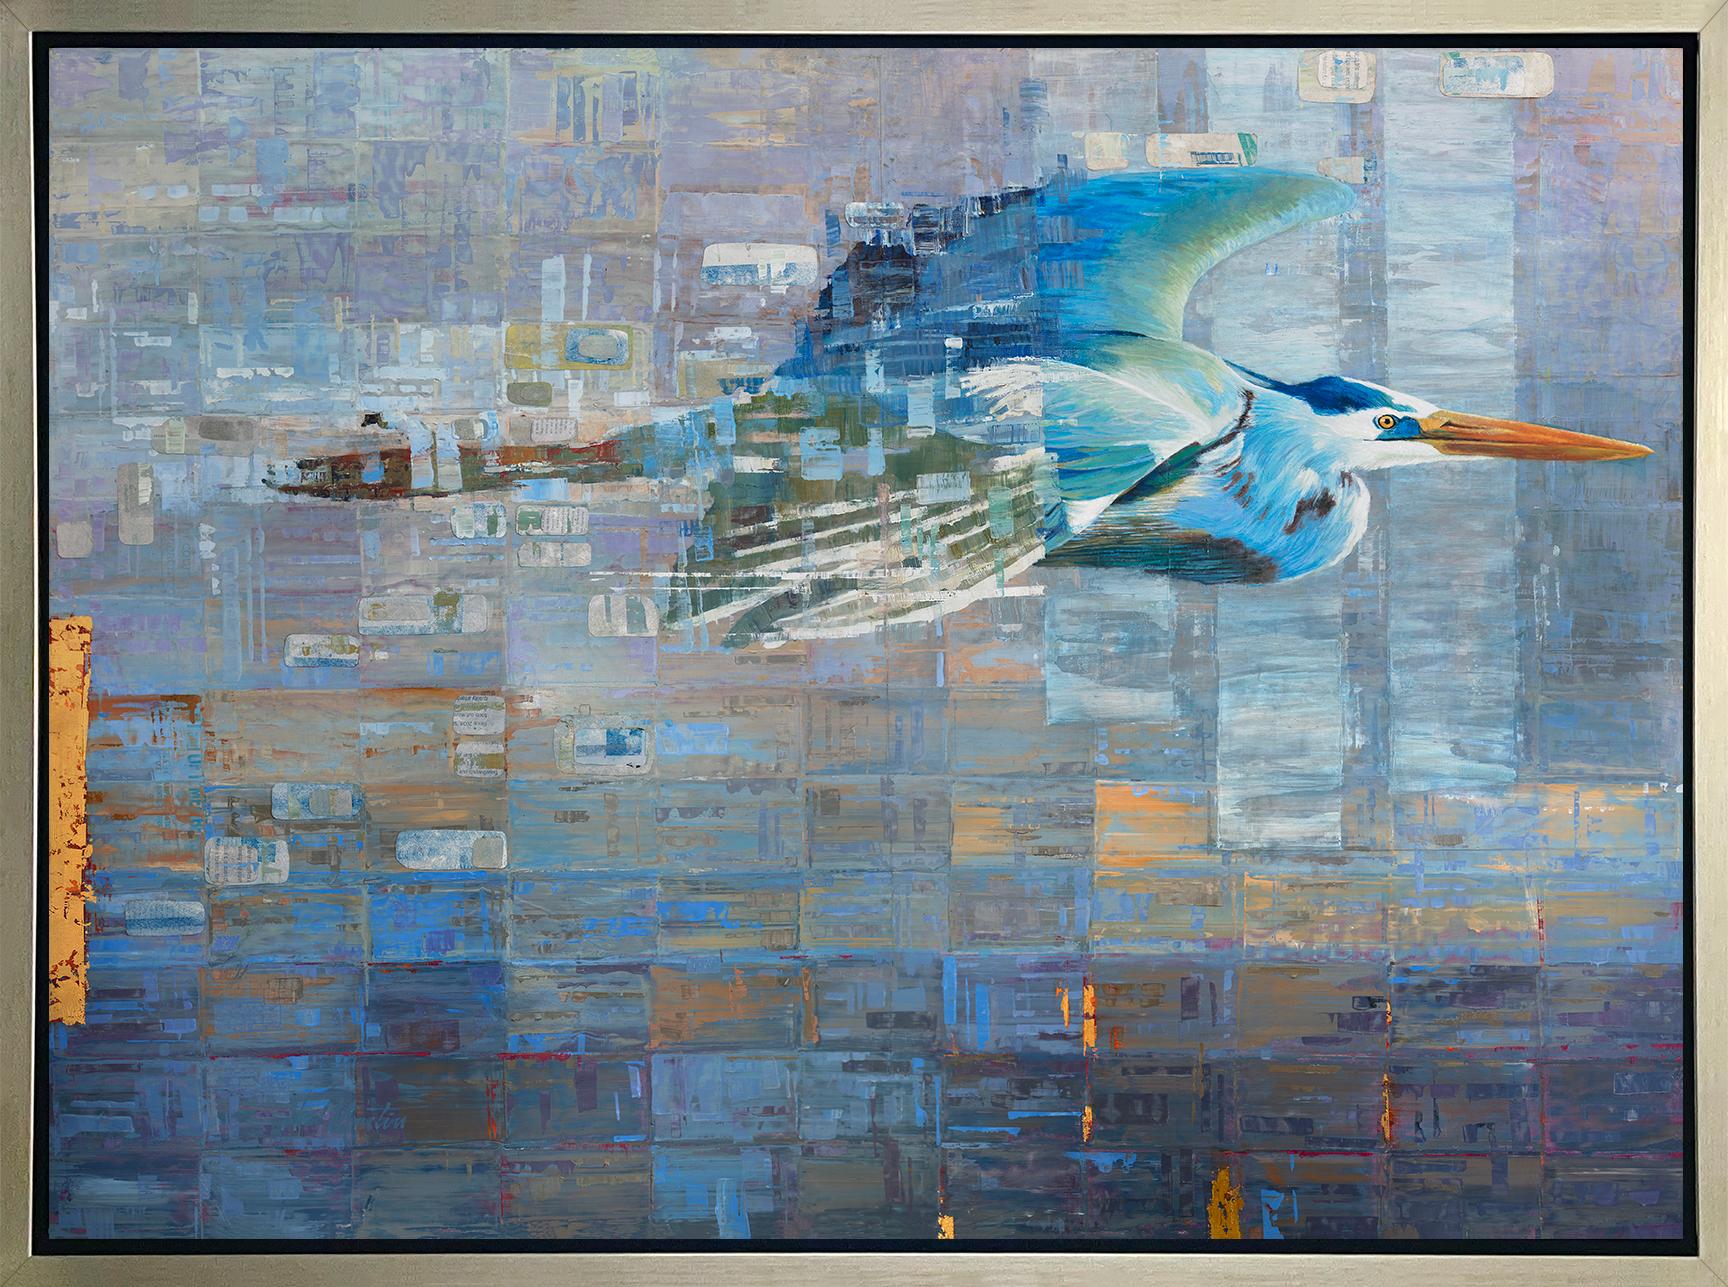 Ned Martin Landscape Print - "Blue Heron in Flight, " Limited Edition Giclee Print, 36" x 48"